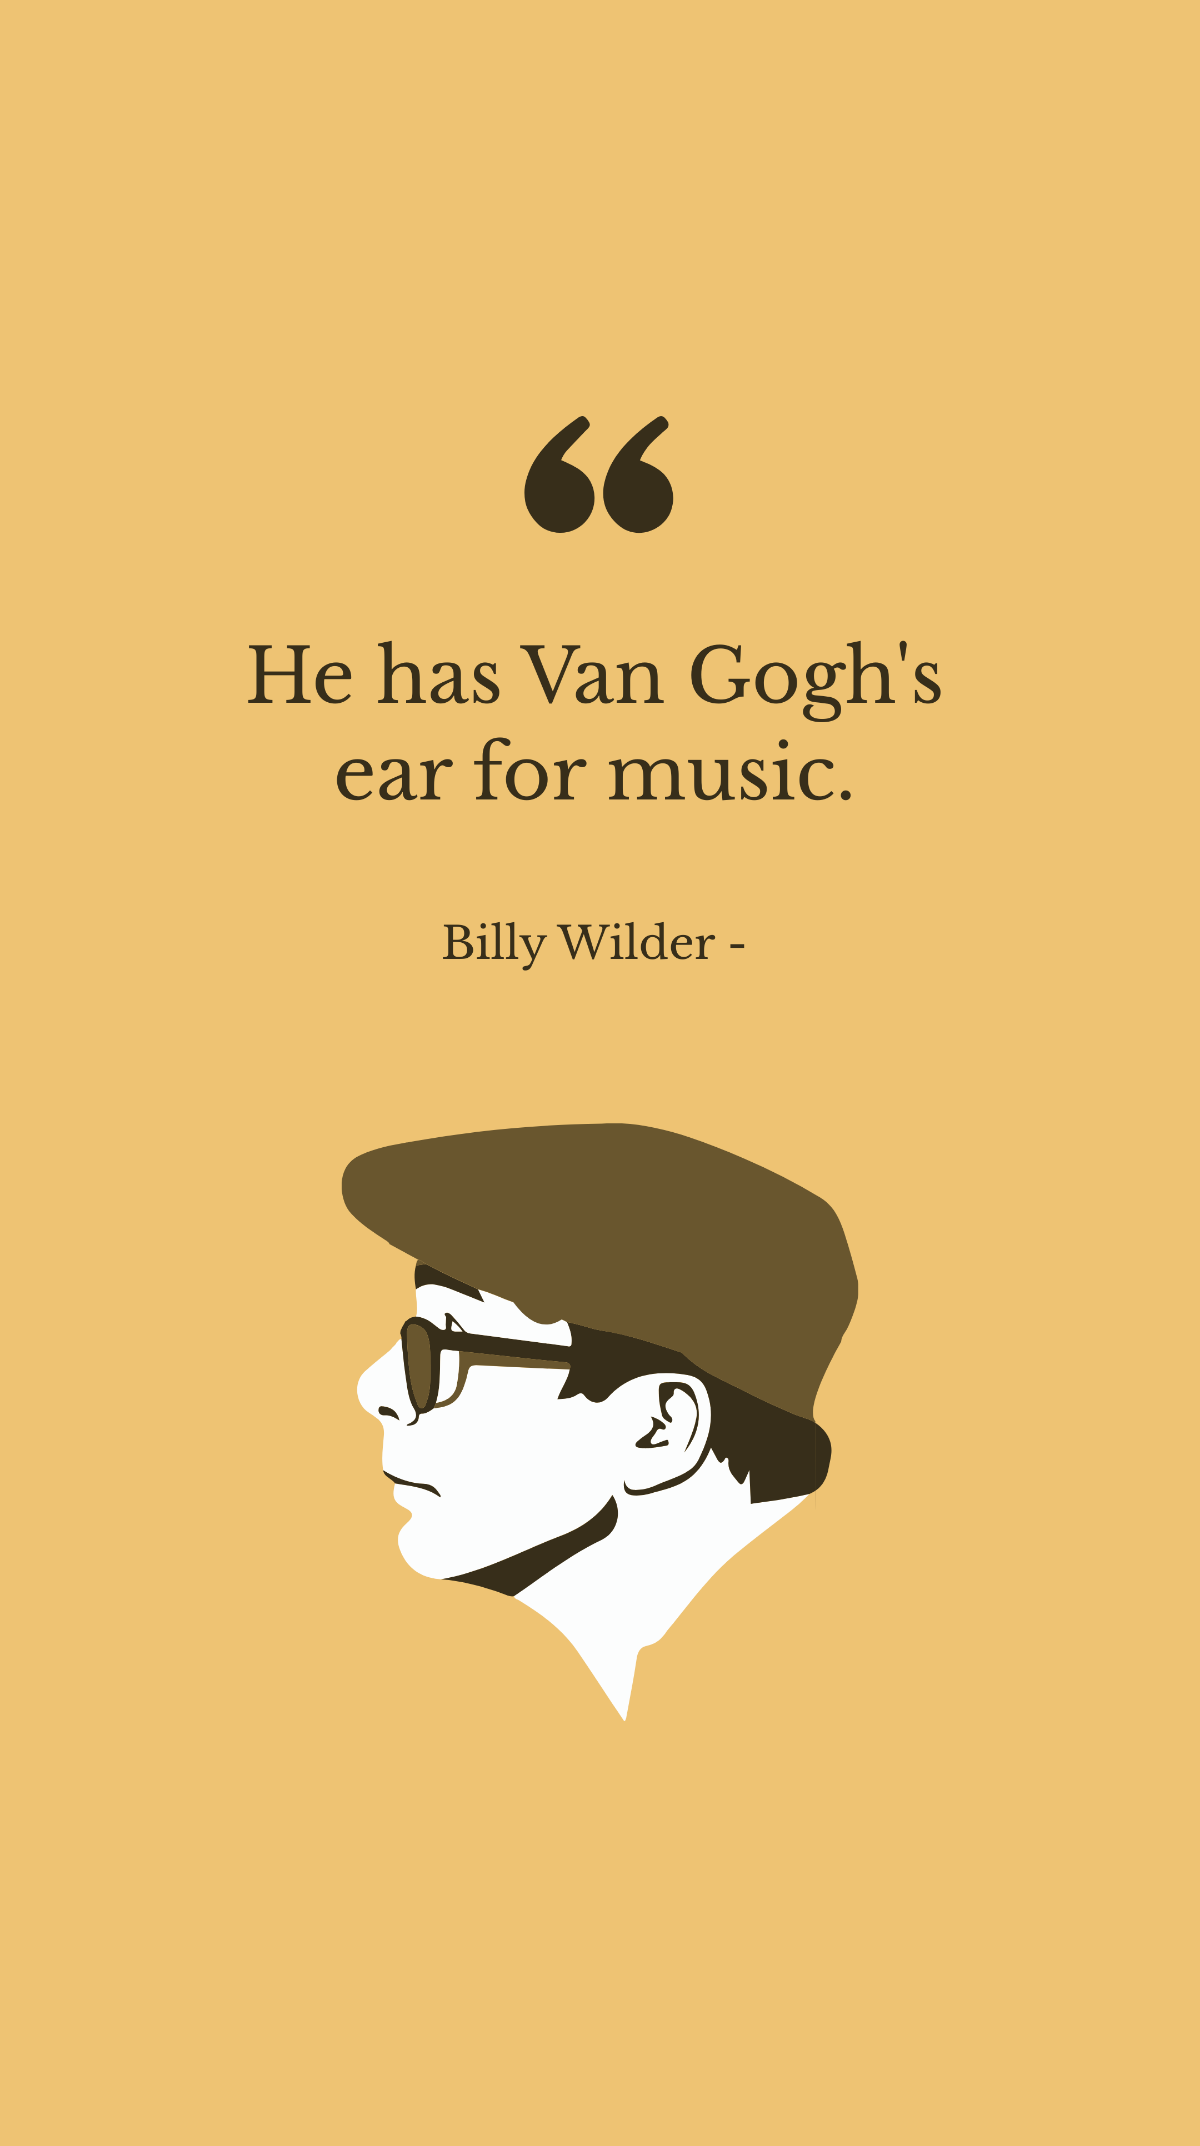 Billy Wilder - He has Van Gogh's ear for music. Template